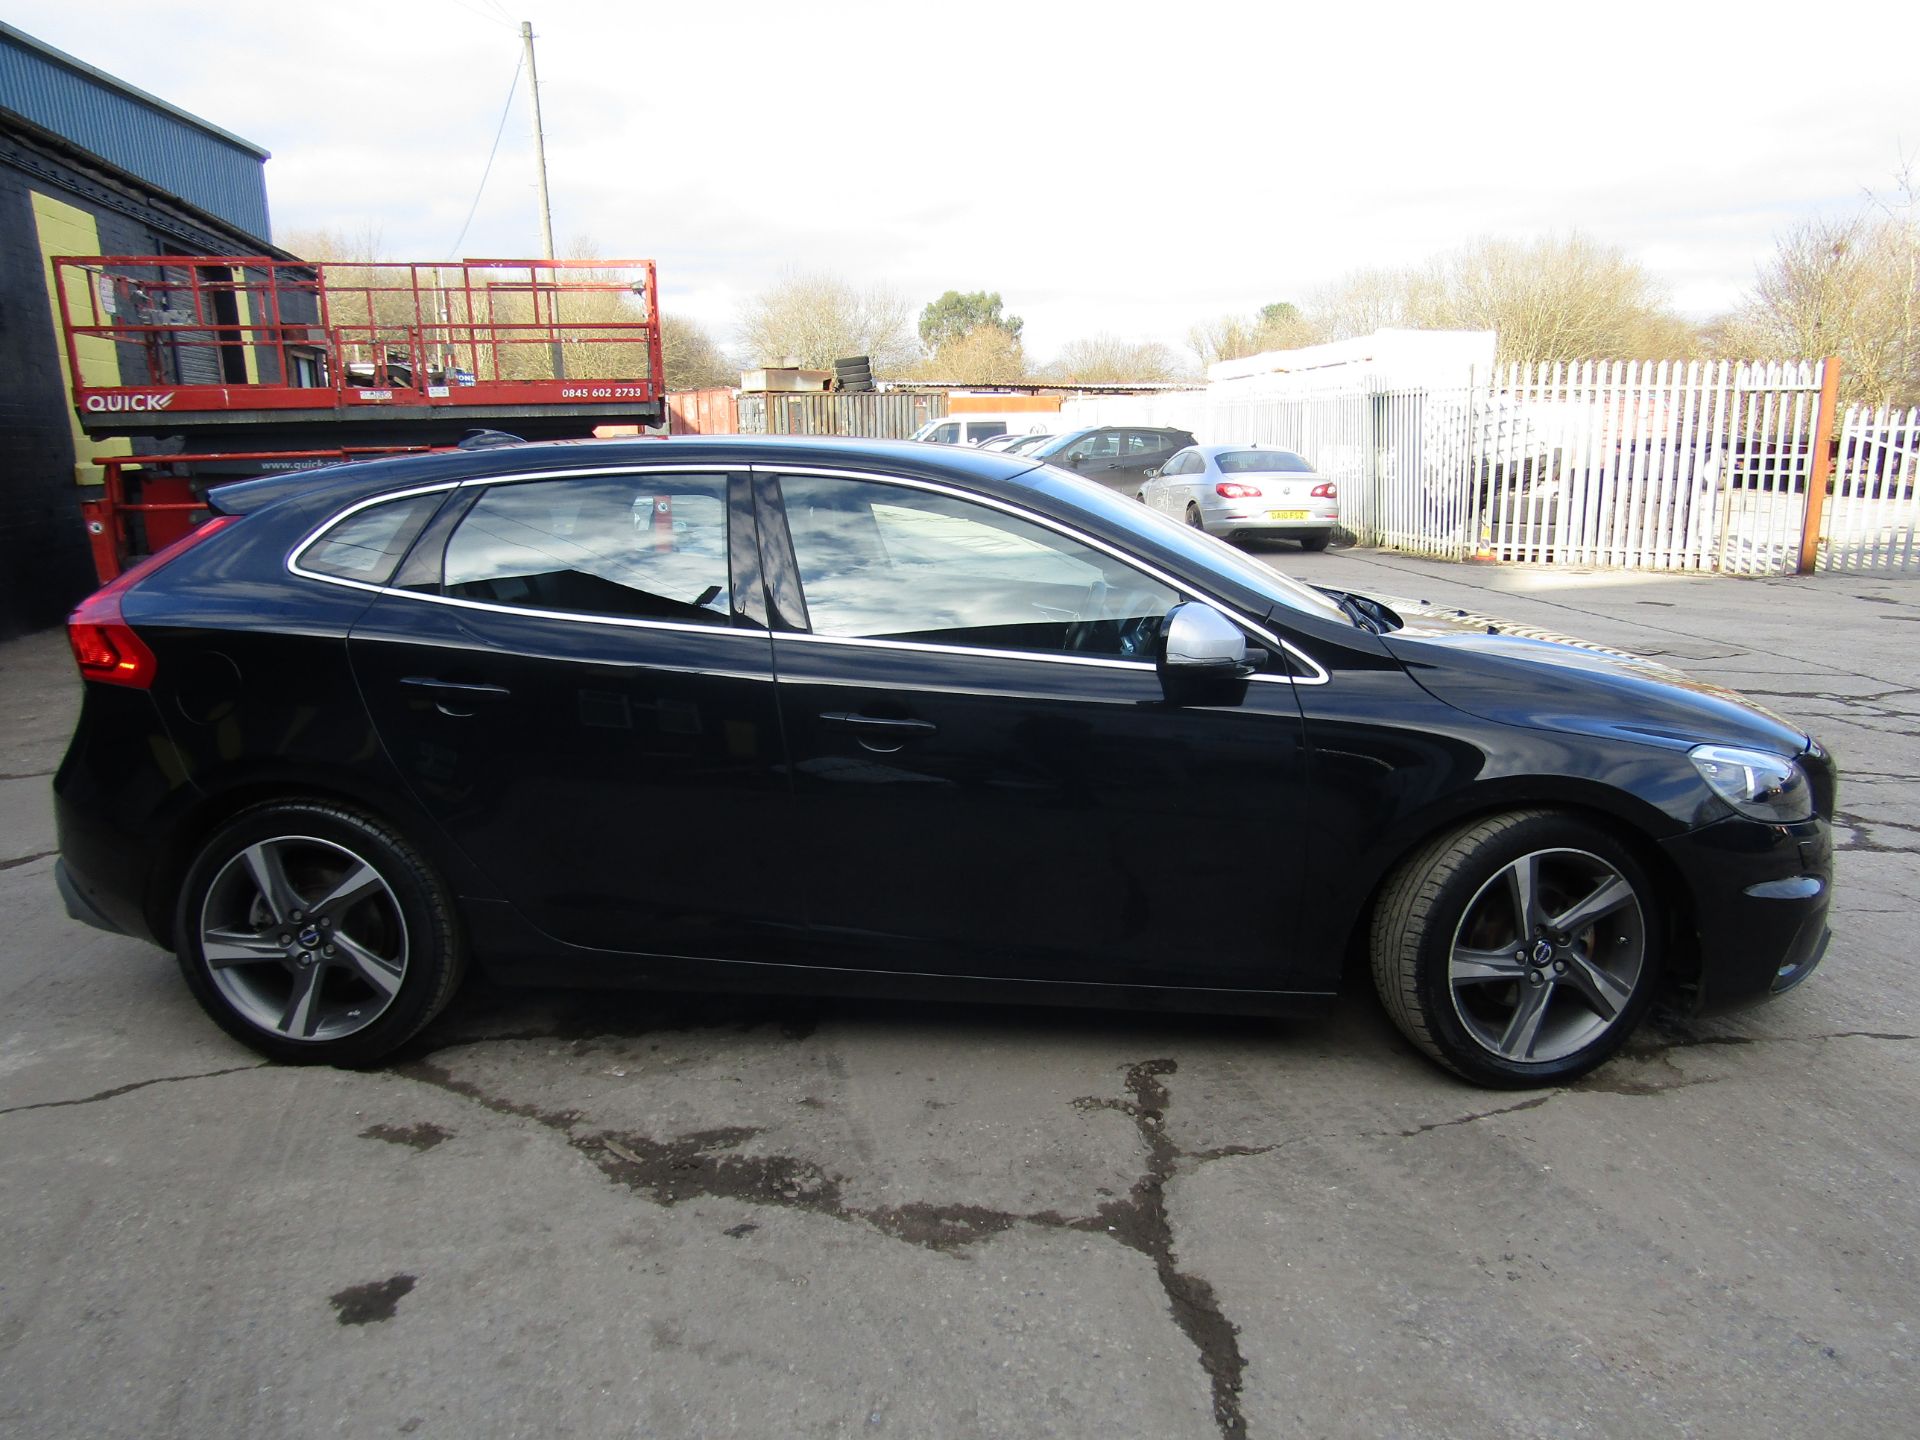 Buyers Special 10% Commission  2014 Volvo V40 Nav D2 R design, 60531 miles (unchecked) MOT until - Image 2 of 23